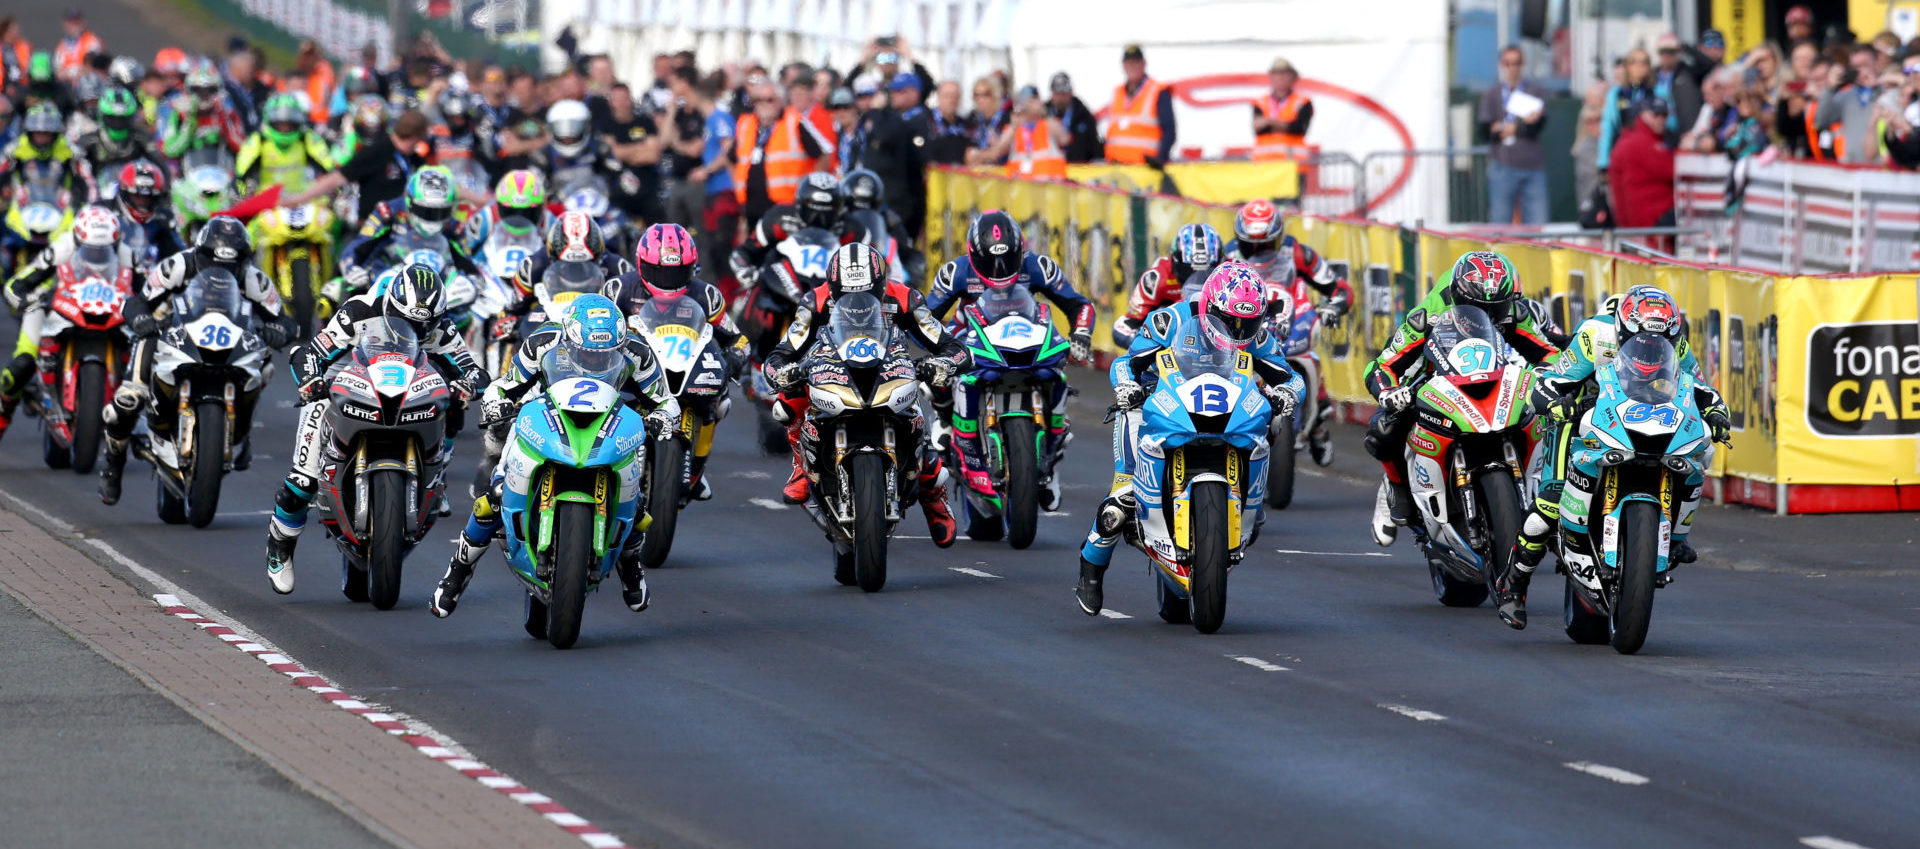 The North West 200 has been cancelled for 2021 due to the Coronavirus pandemic. Photo by Stephen Davison/Pacemaker Press International, courtesy Coleraine and District Motor Club Ltd.